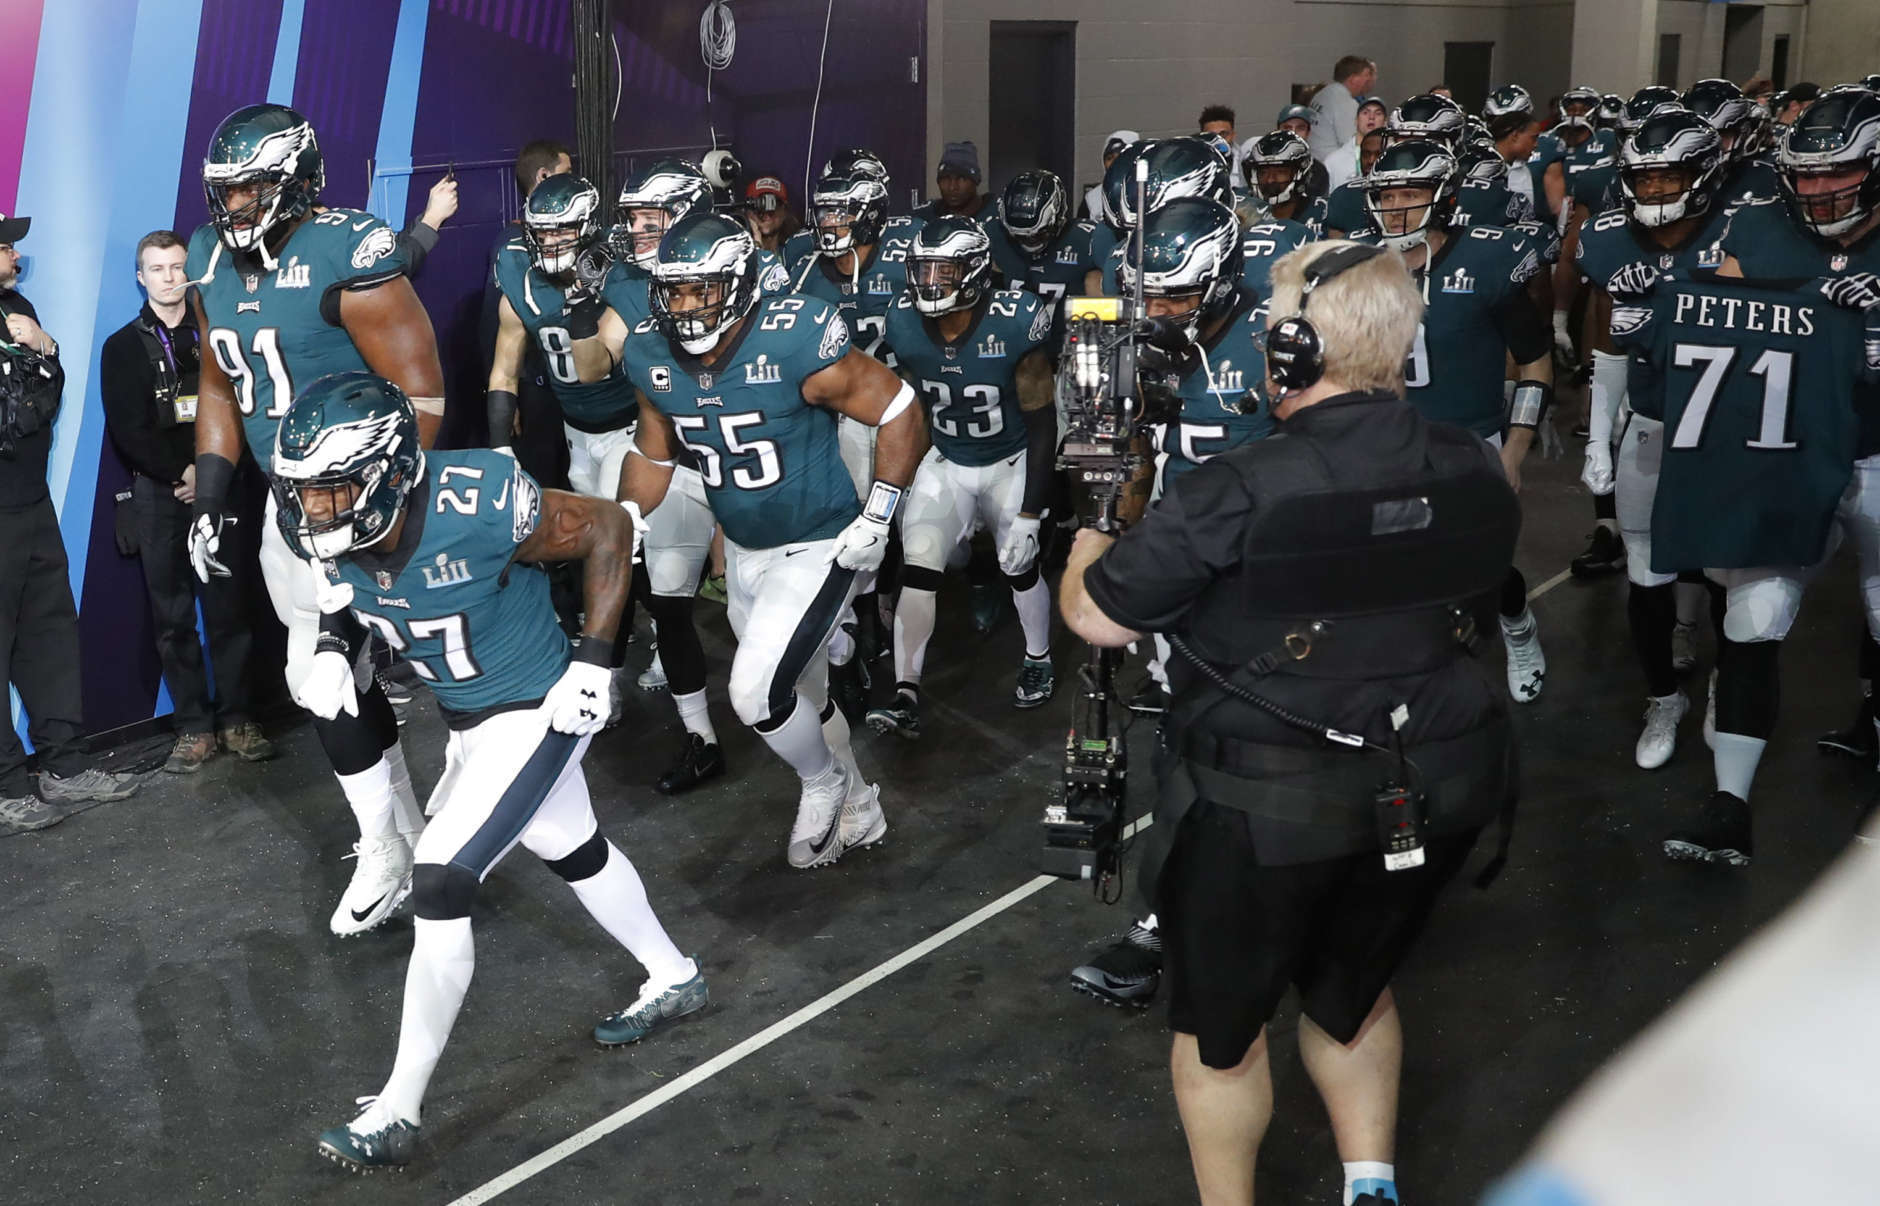 Philadelphia Eagles players run to the field as they are introduced before the NFL Super Bowl 52 football game against the New England Patriots, Sunday, Feb. 4, 2018, in Minneapolis. (AP Photo/Charlie Neibergall)